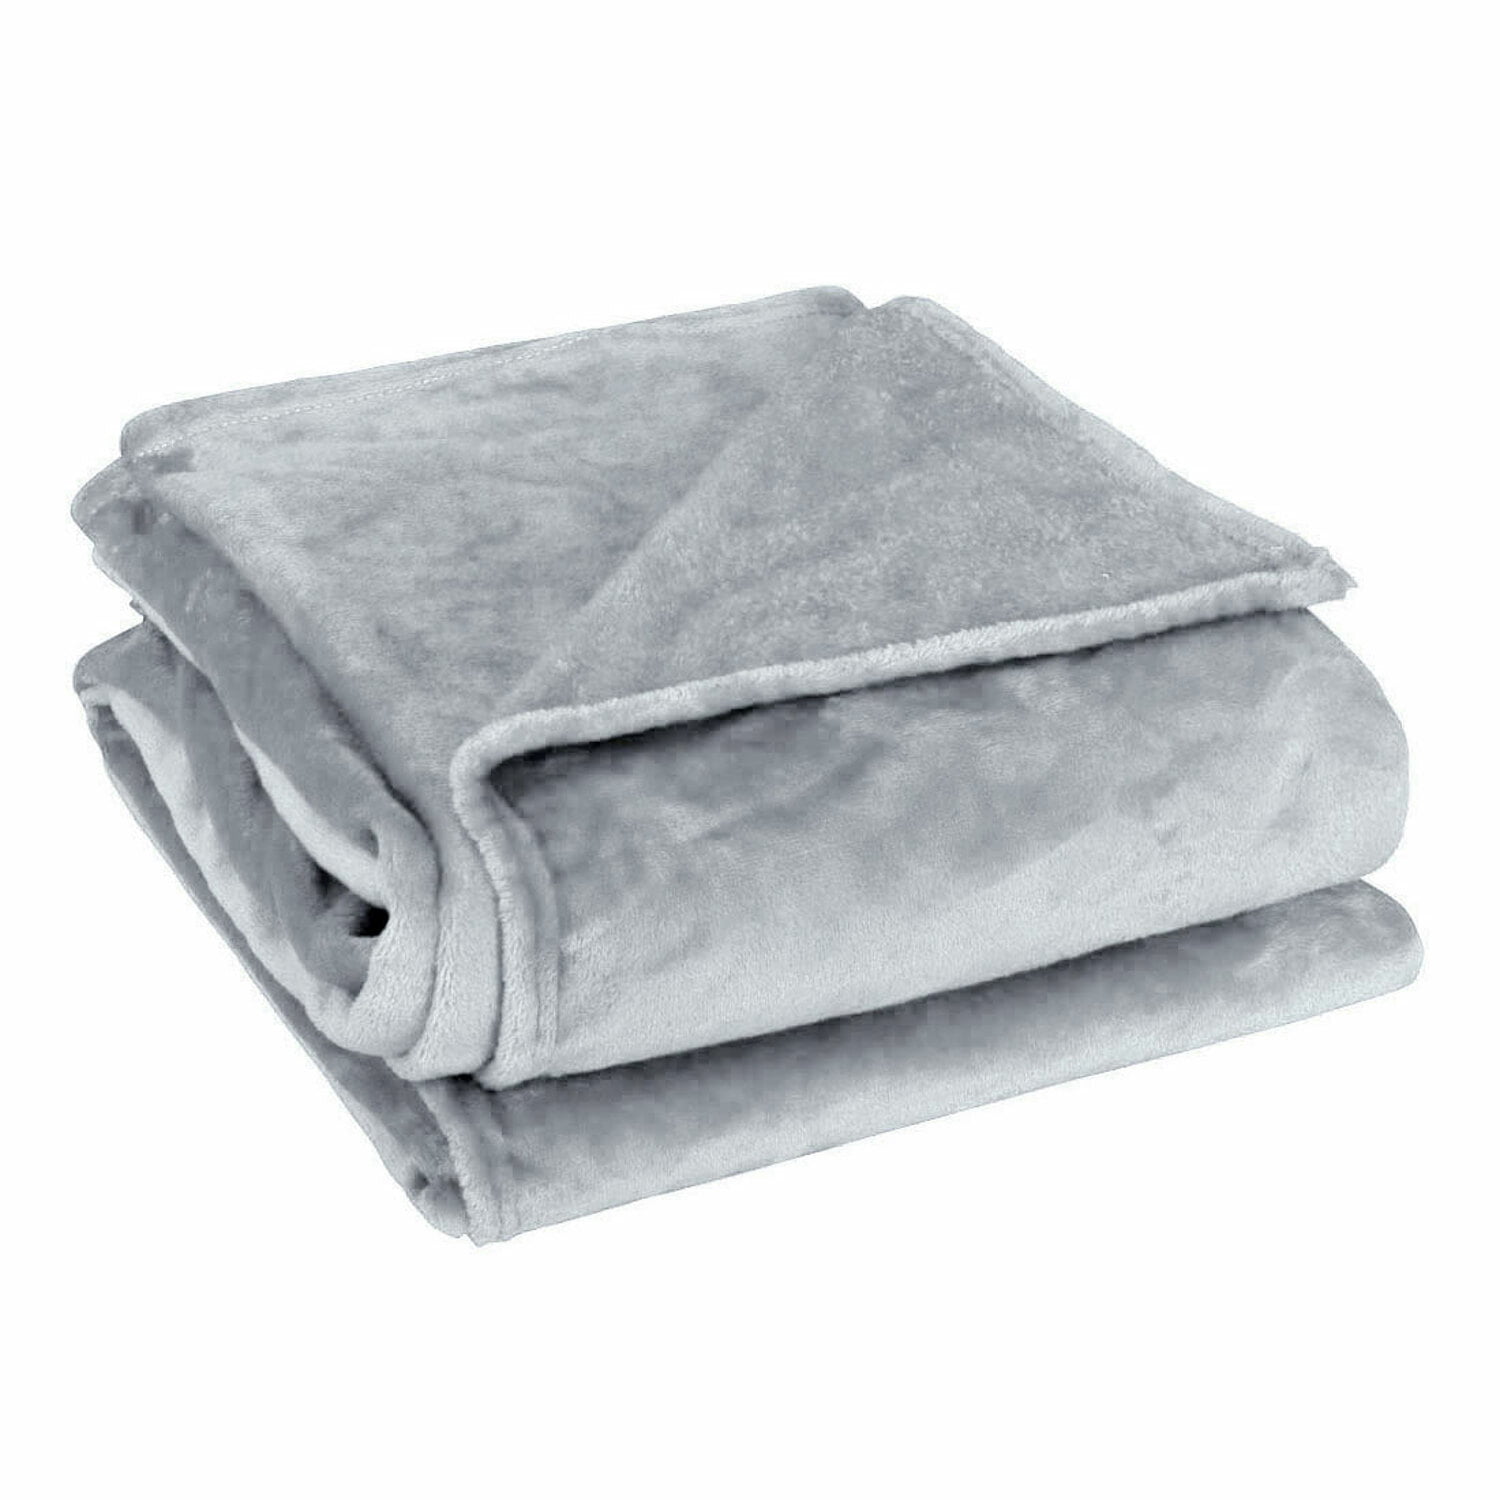 Ultra-Soft Micro Throw Blanket Fleece Flannel Blanket Half of The Frame is Yellow and The Other Half of The Frame is Blue Lightweight Comfortable Fuzzy Premium Warm Anti-Pilling Thin Cozy 